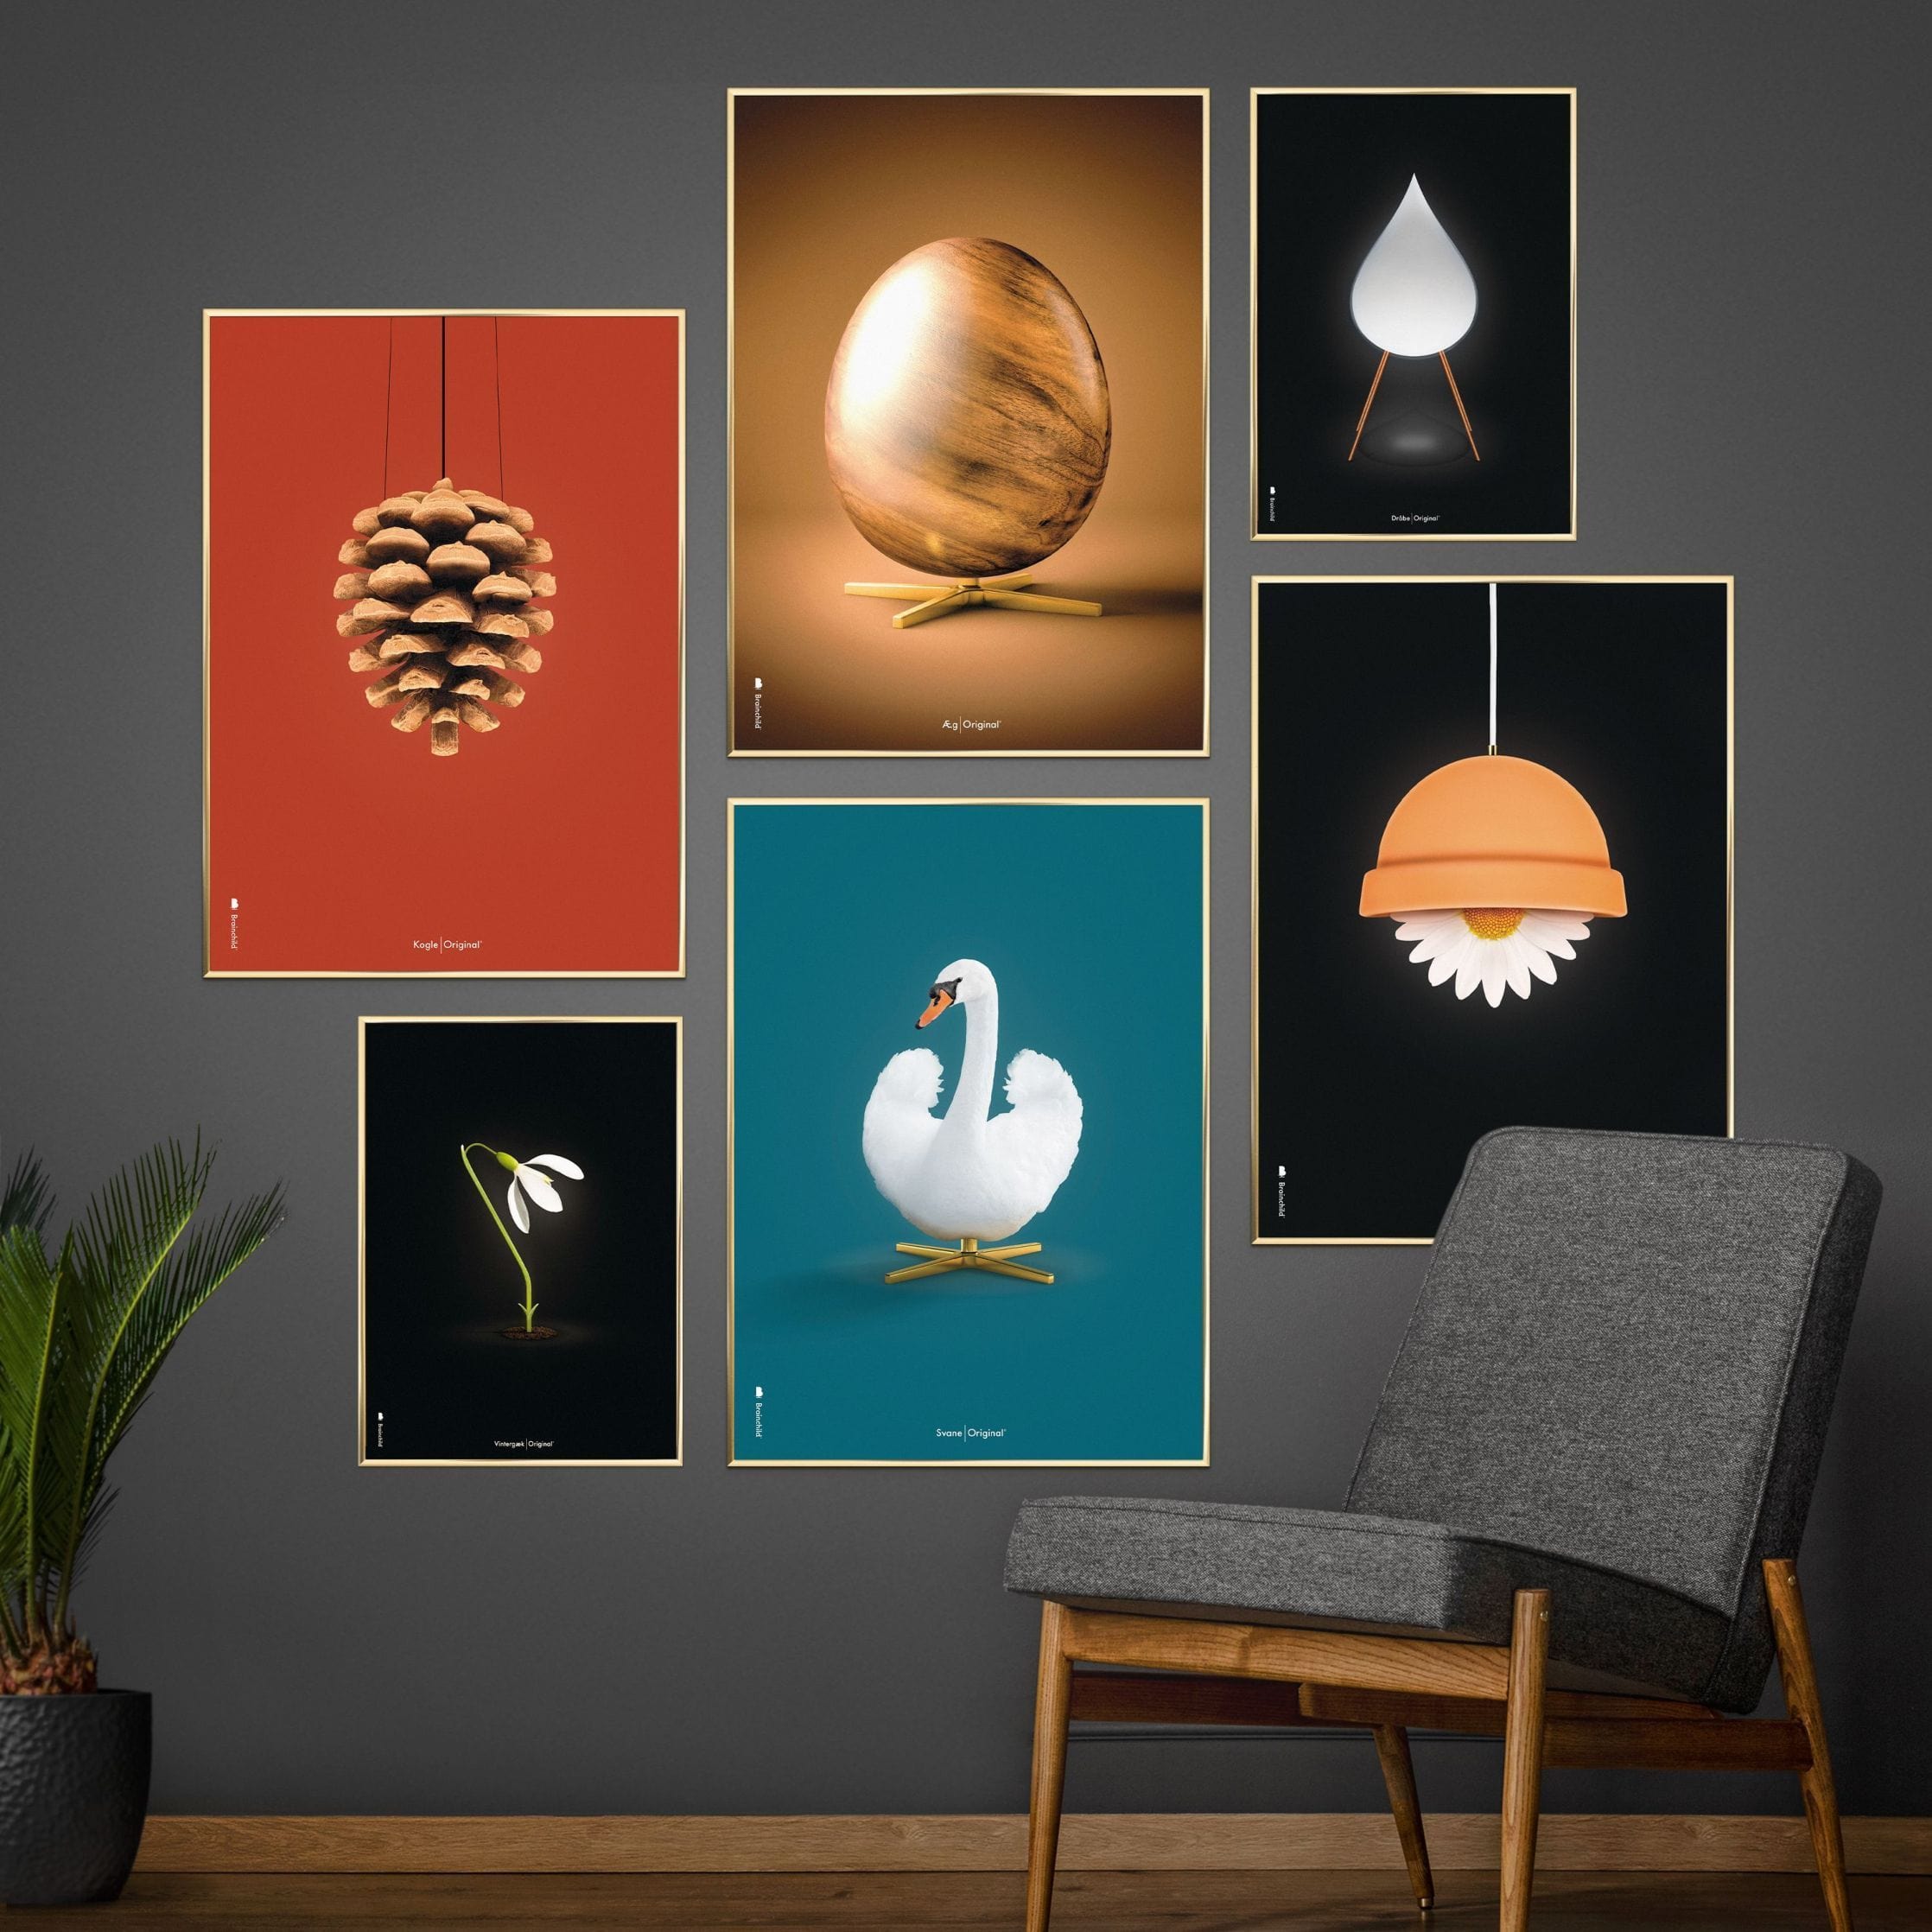 Brainchild Pine Cone Classic Poster, Frame In Black Lacquered Wood A5, Red Background